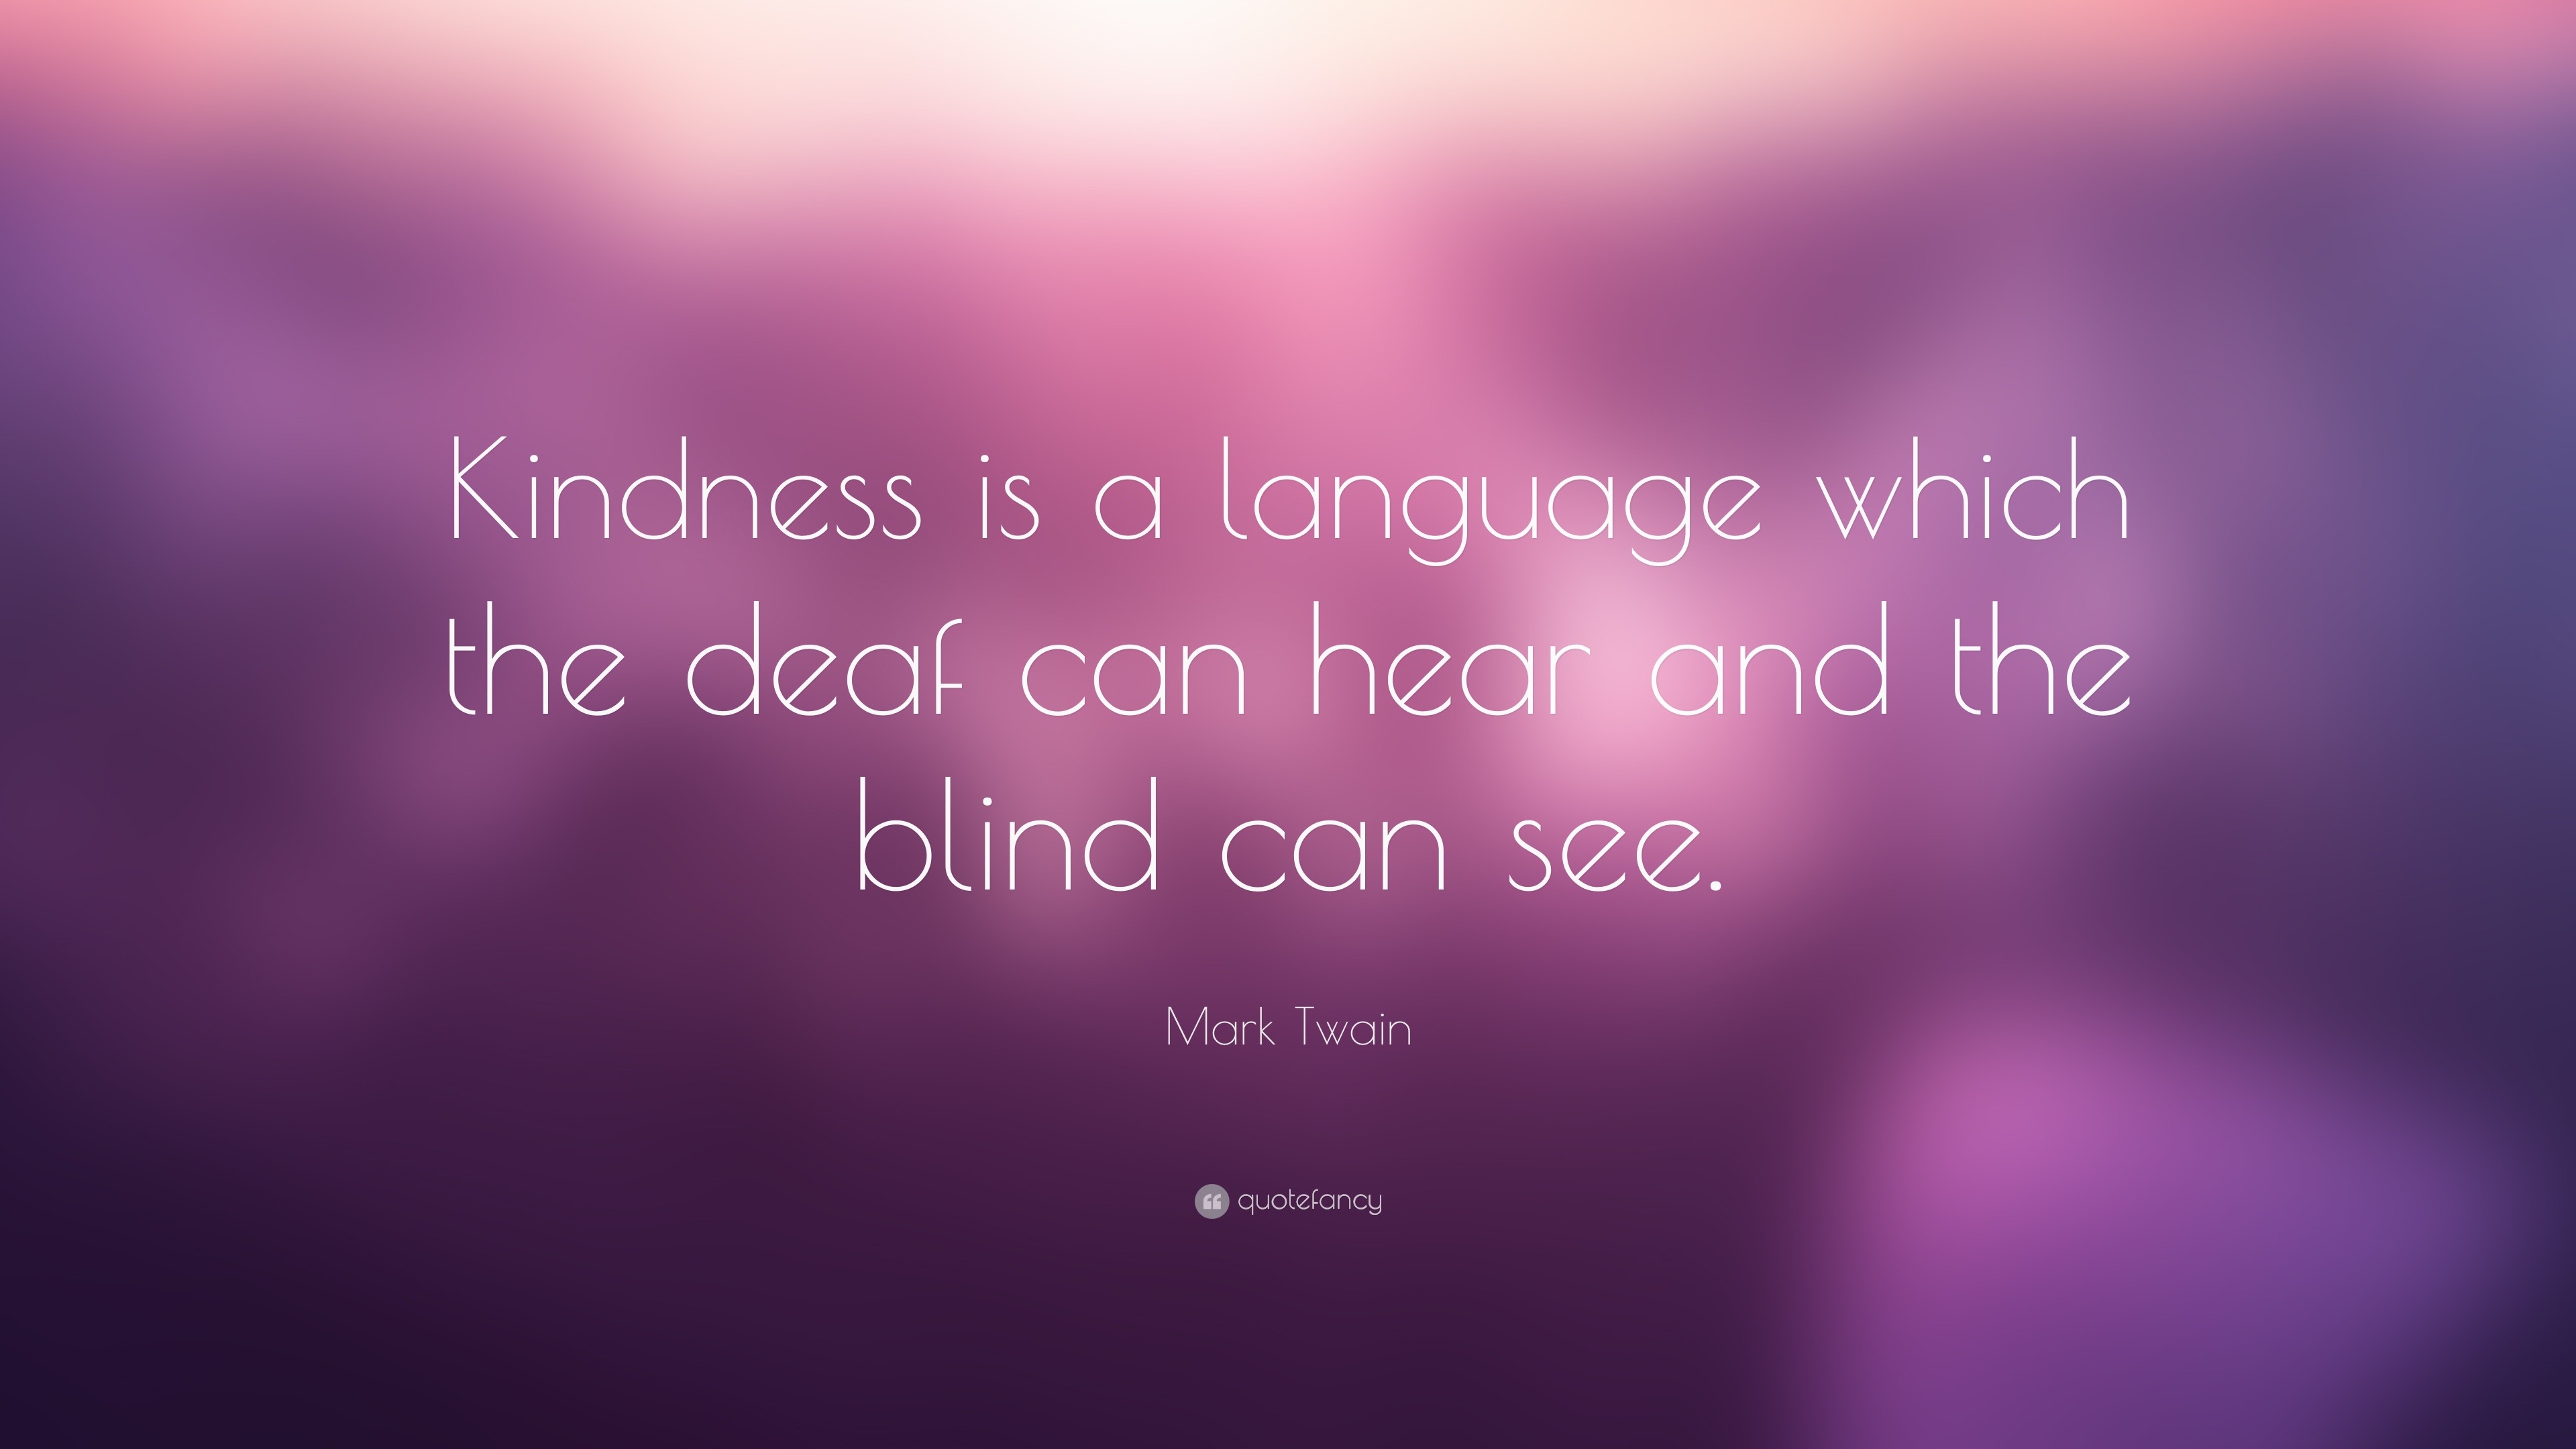 Mark Twain Quote: “Kindness is a language which the deaf can hear and